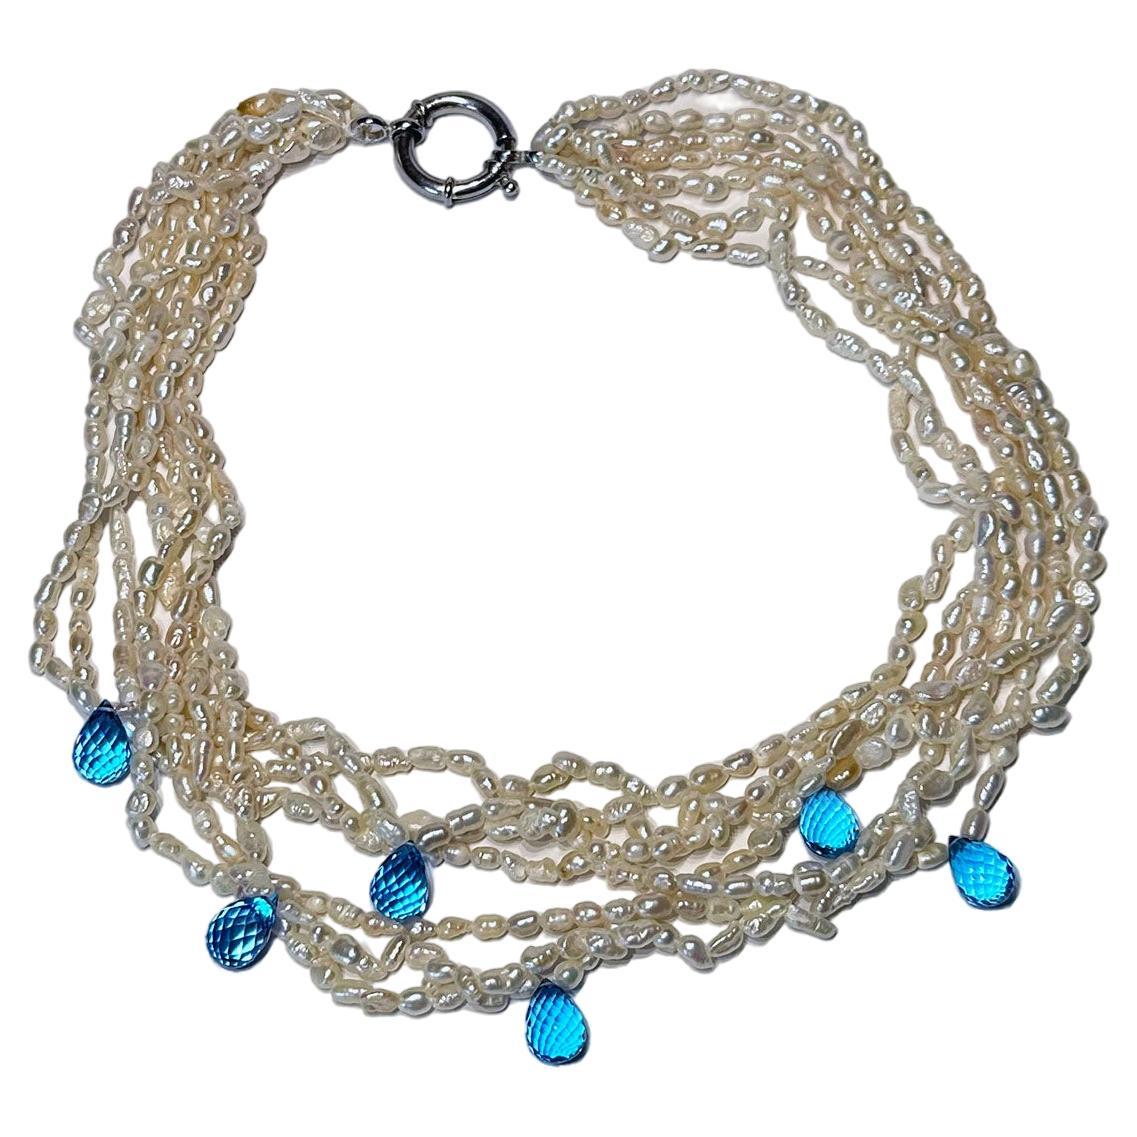 A Freshwater Keishi Pearl Necklace with Topaz Briolettes